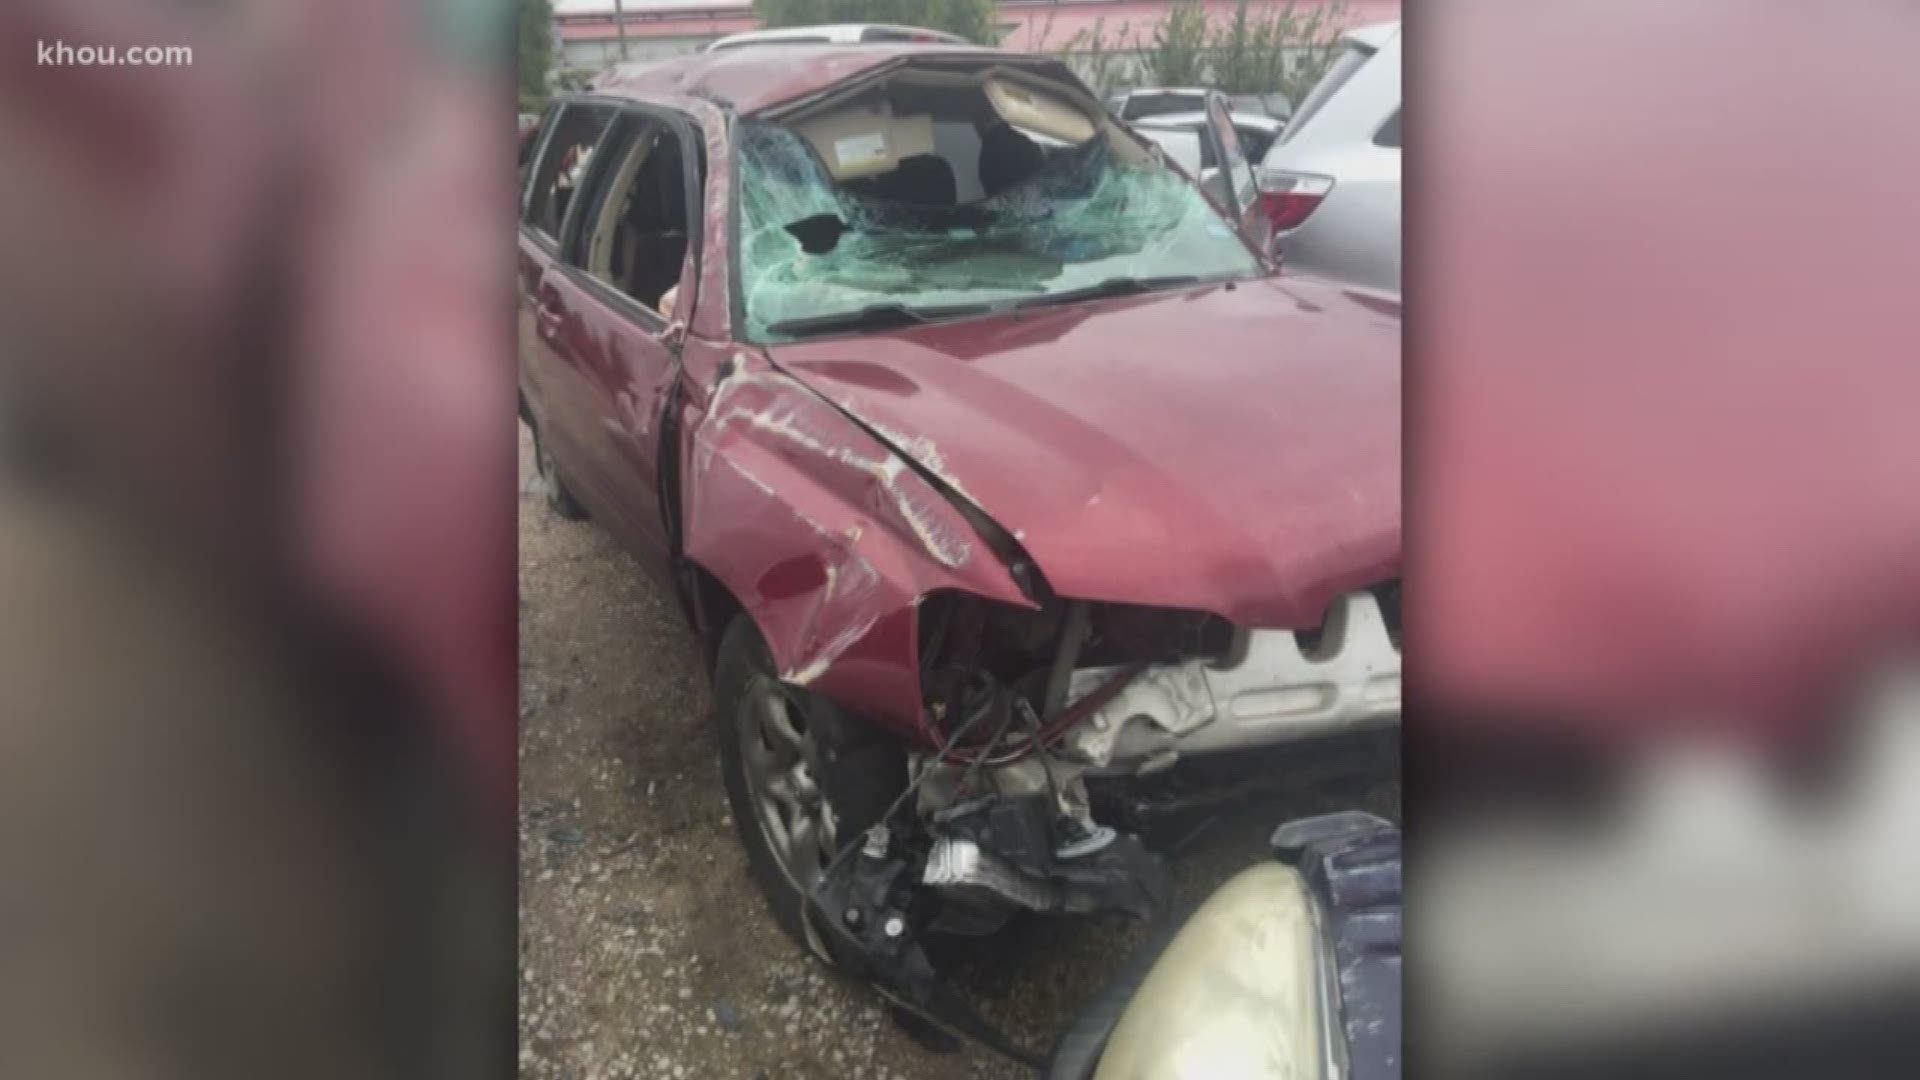 According to the family, the pickup driver side swiped them and then hit them a second time from behind, causing their SUV to flip three times.